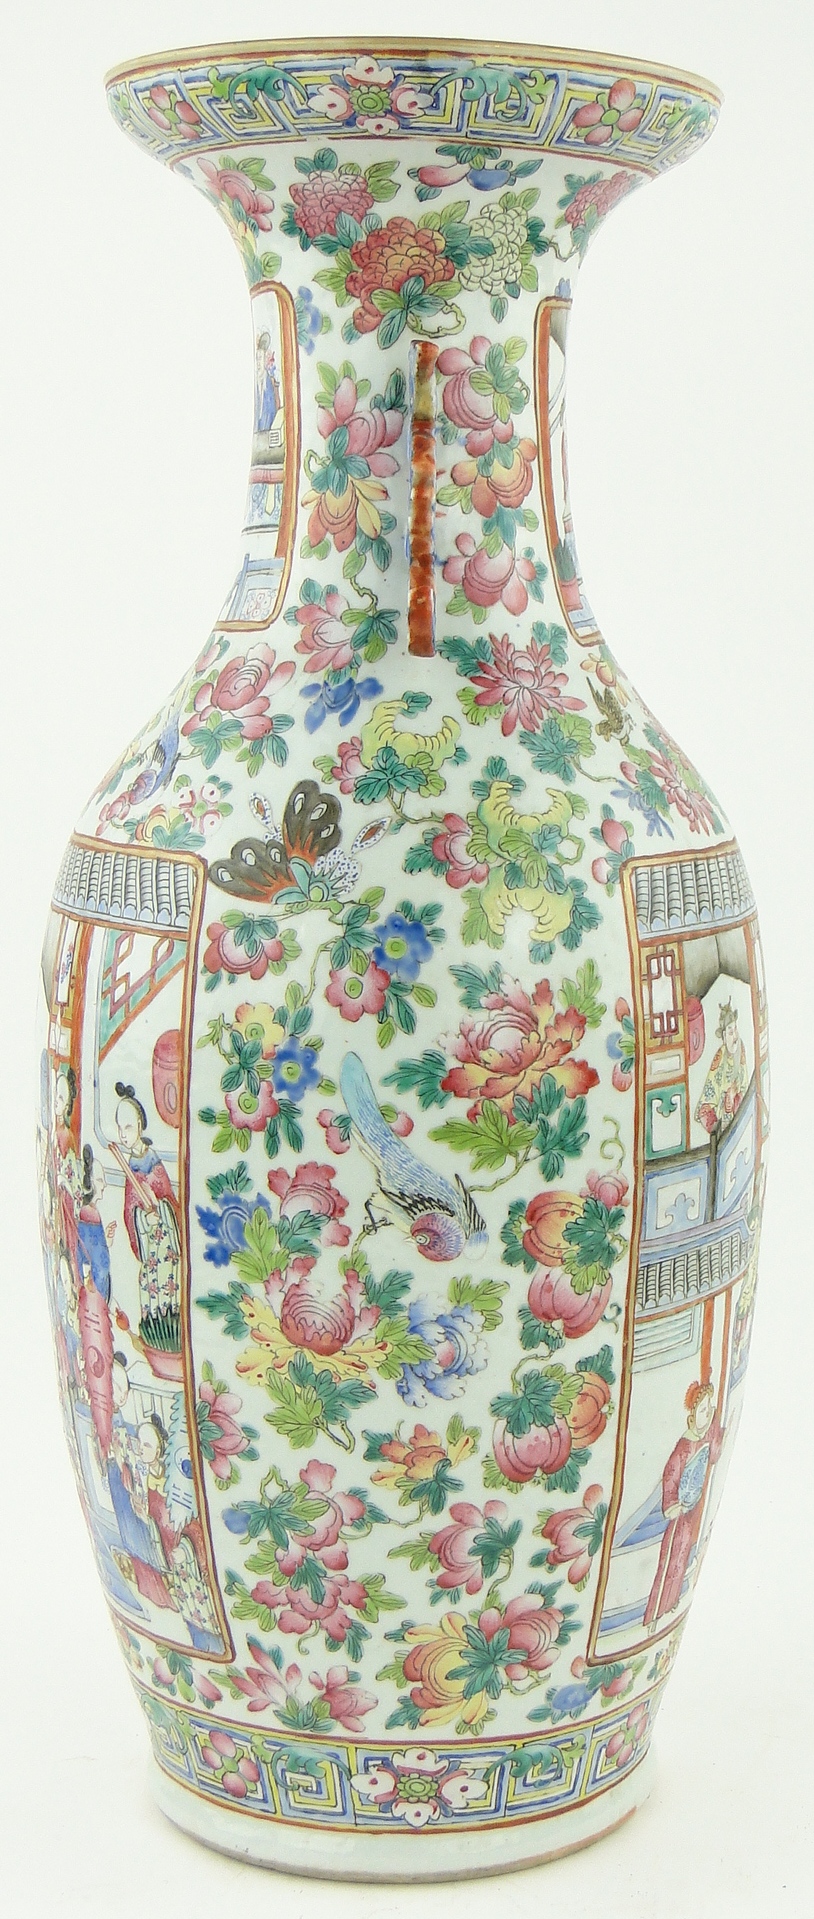 A Cantonese porcelain vase
with panels depicting figures, on butterfly and floral decorated ground, - Image 7 of 11